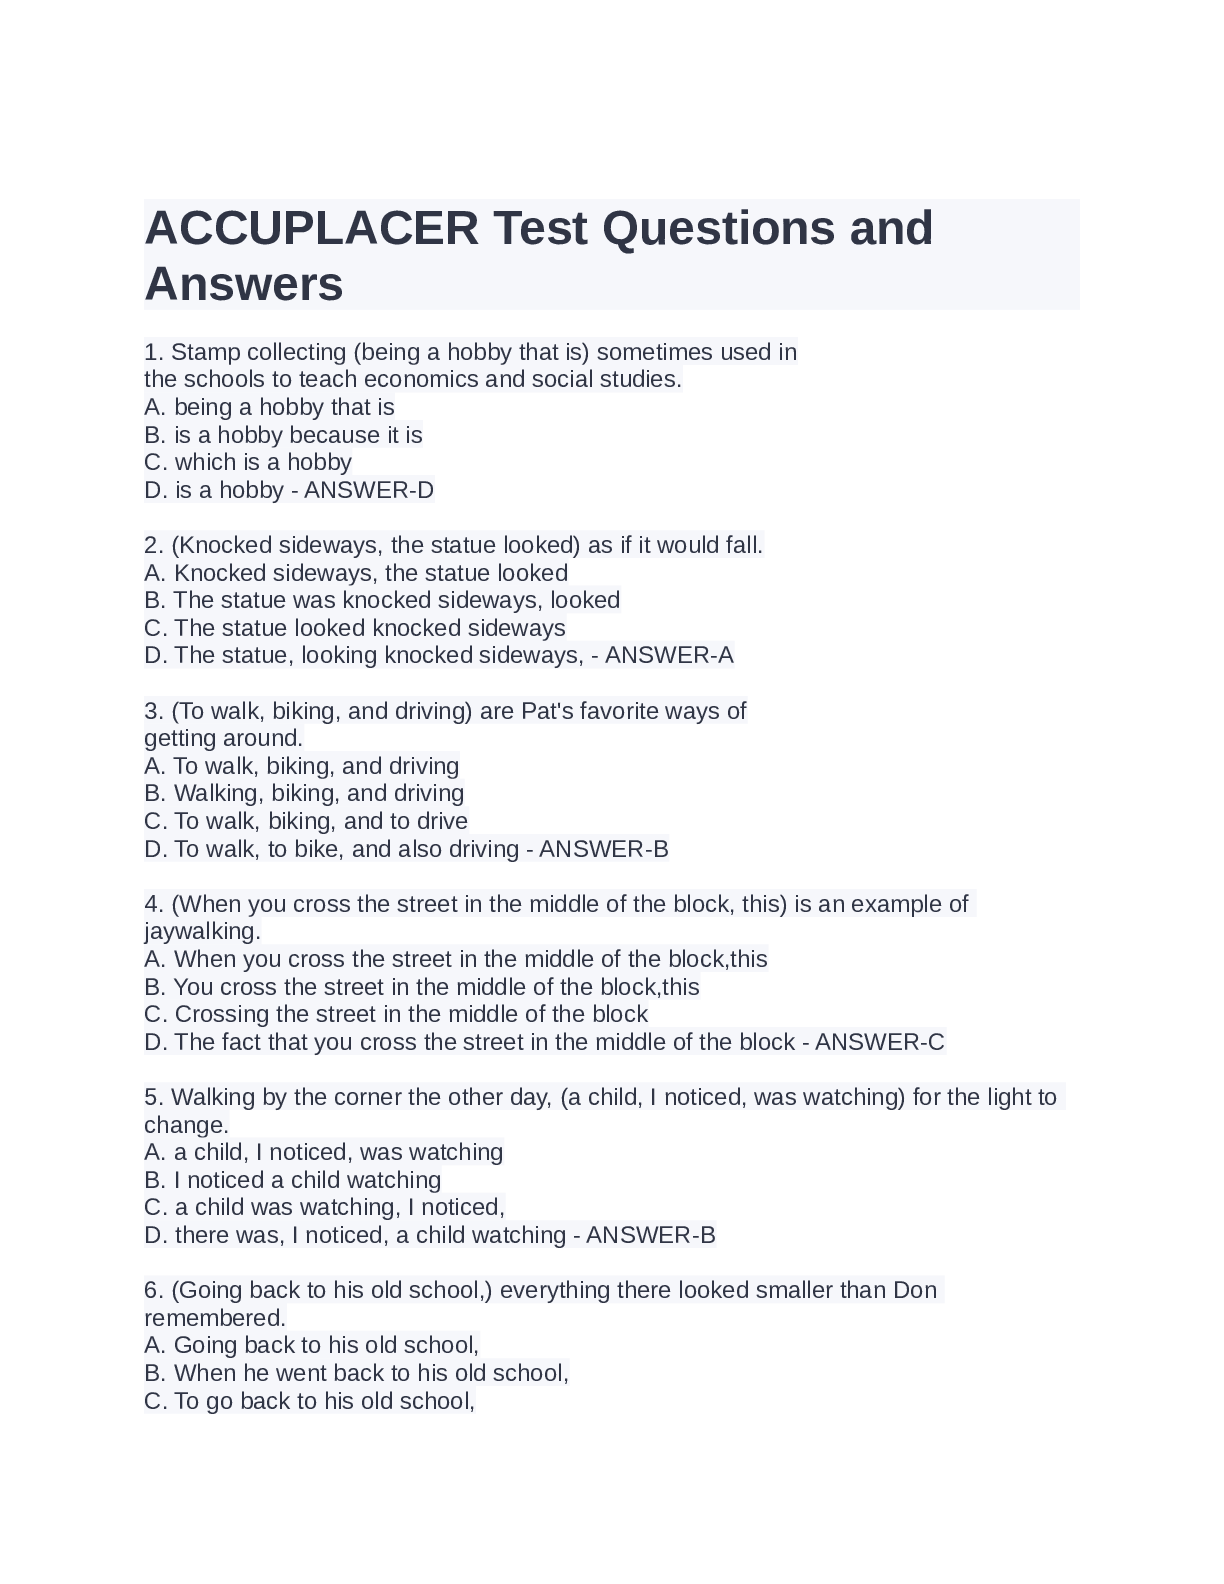 accuplacer-reading-test-questions-and-answers-2022-already-graded-a